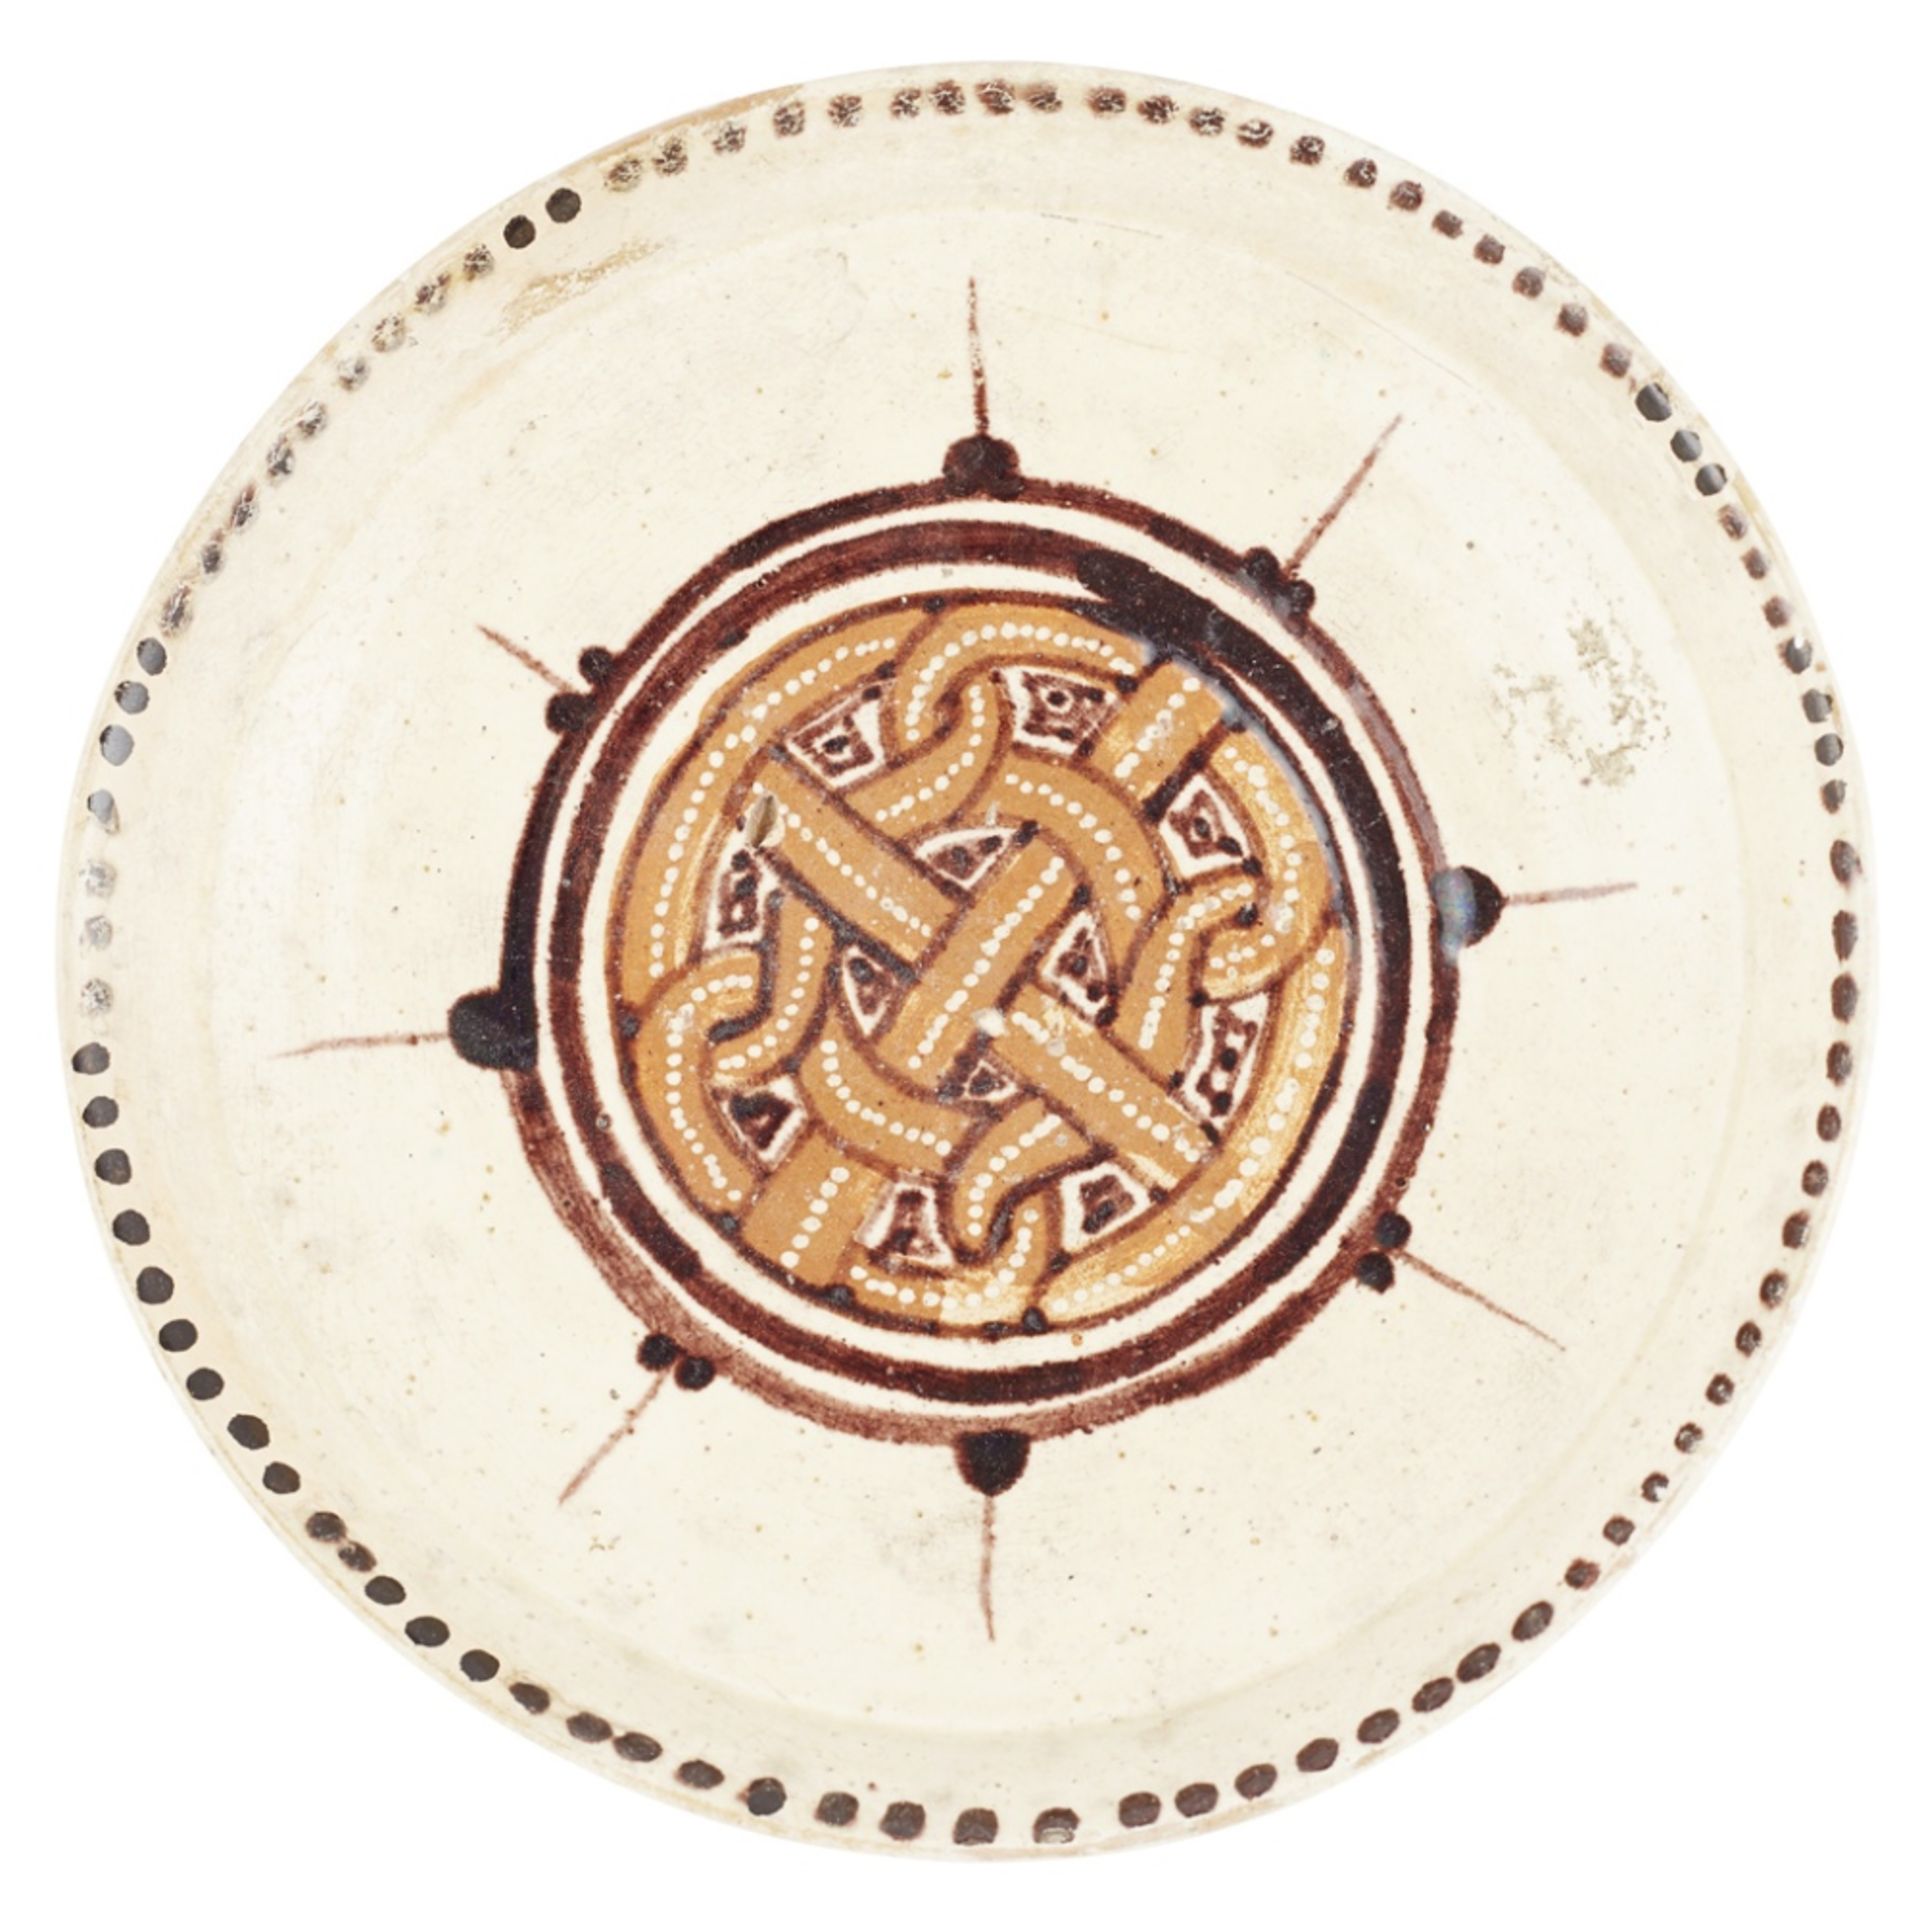 NISHAPUR SLIP-PAINTED POTTERY BOWLPERSIA, 10TH CENTURY of shallow form with a slightly everted rim